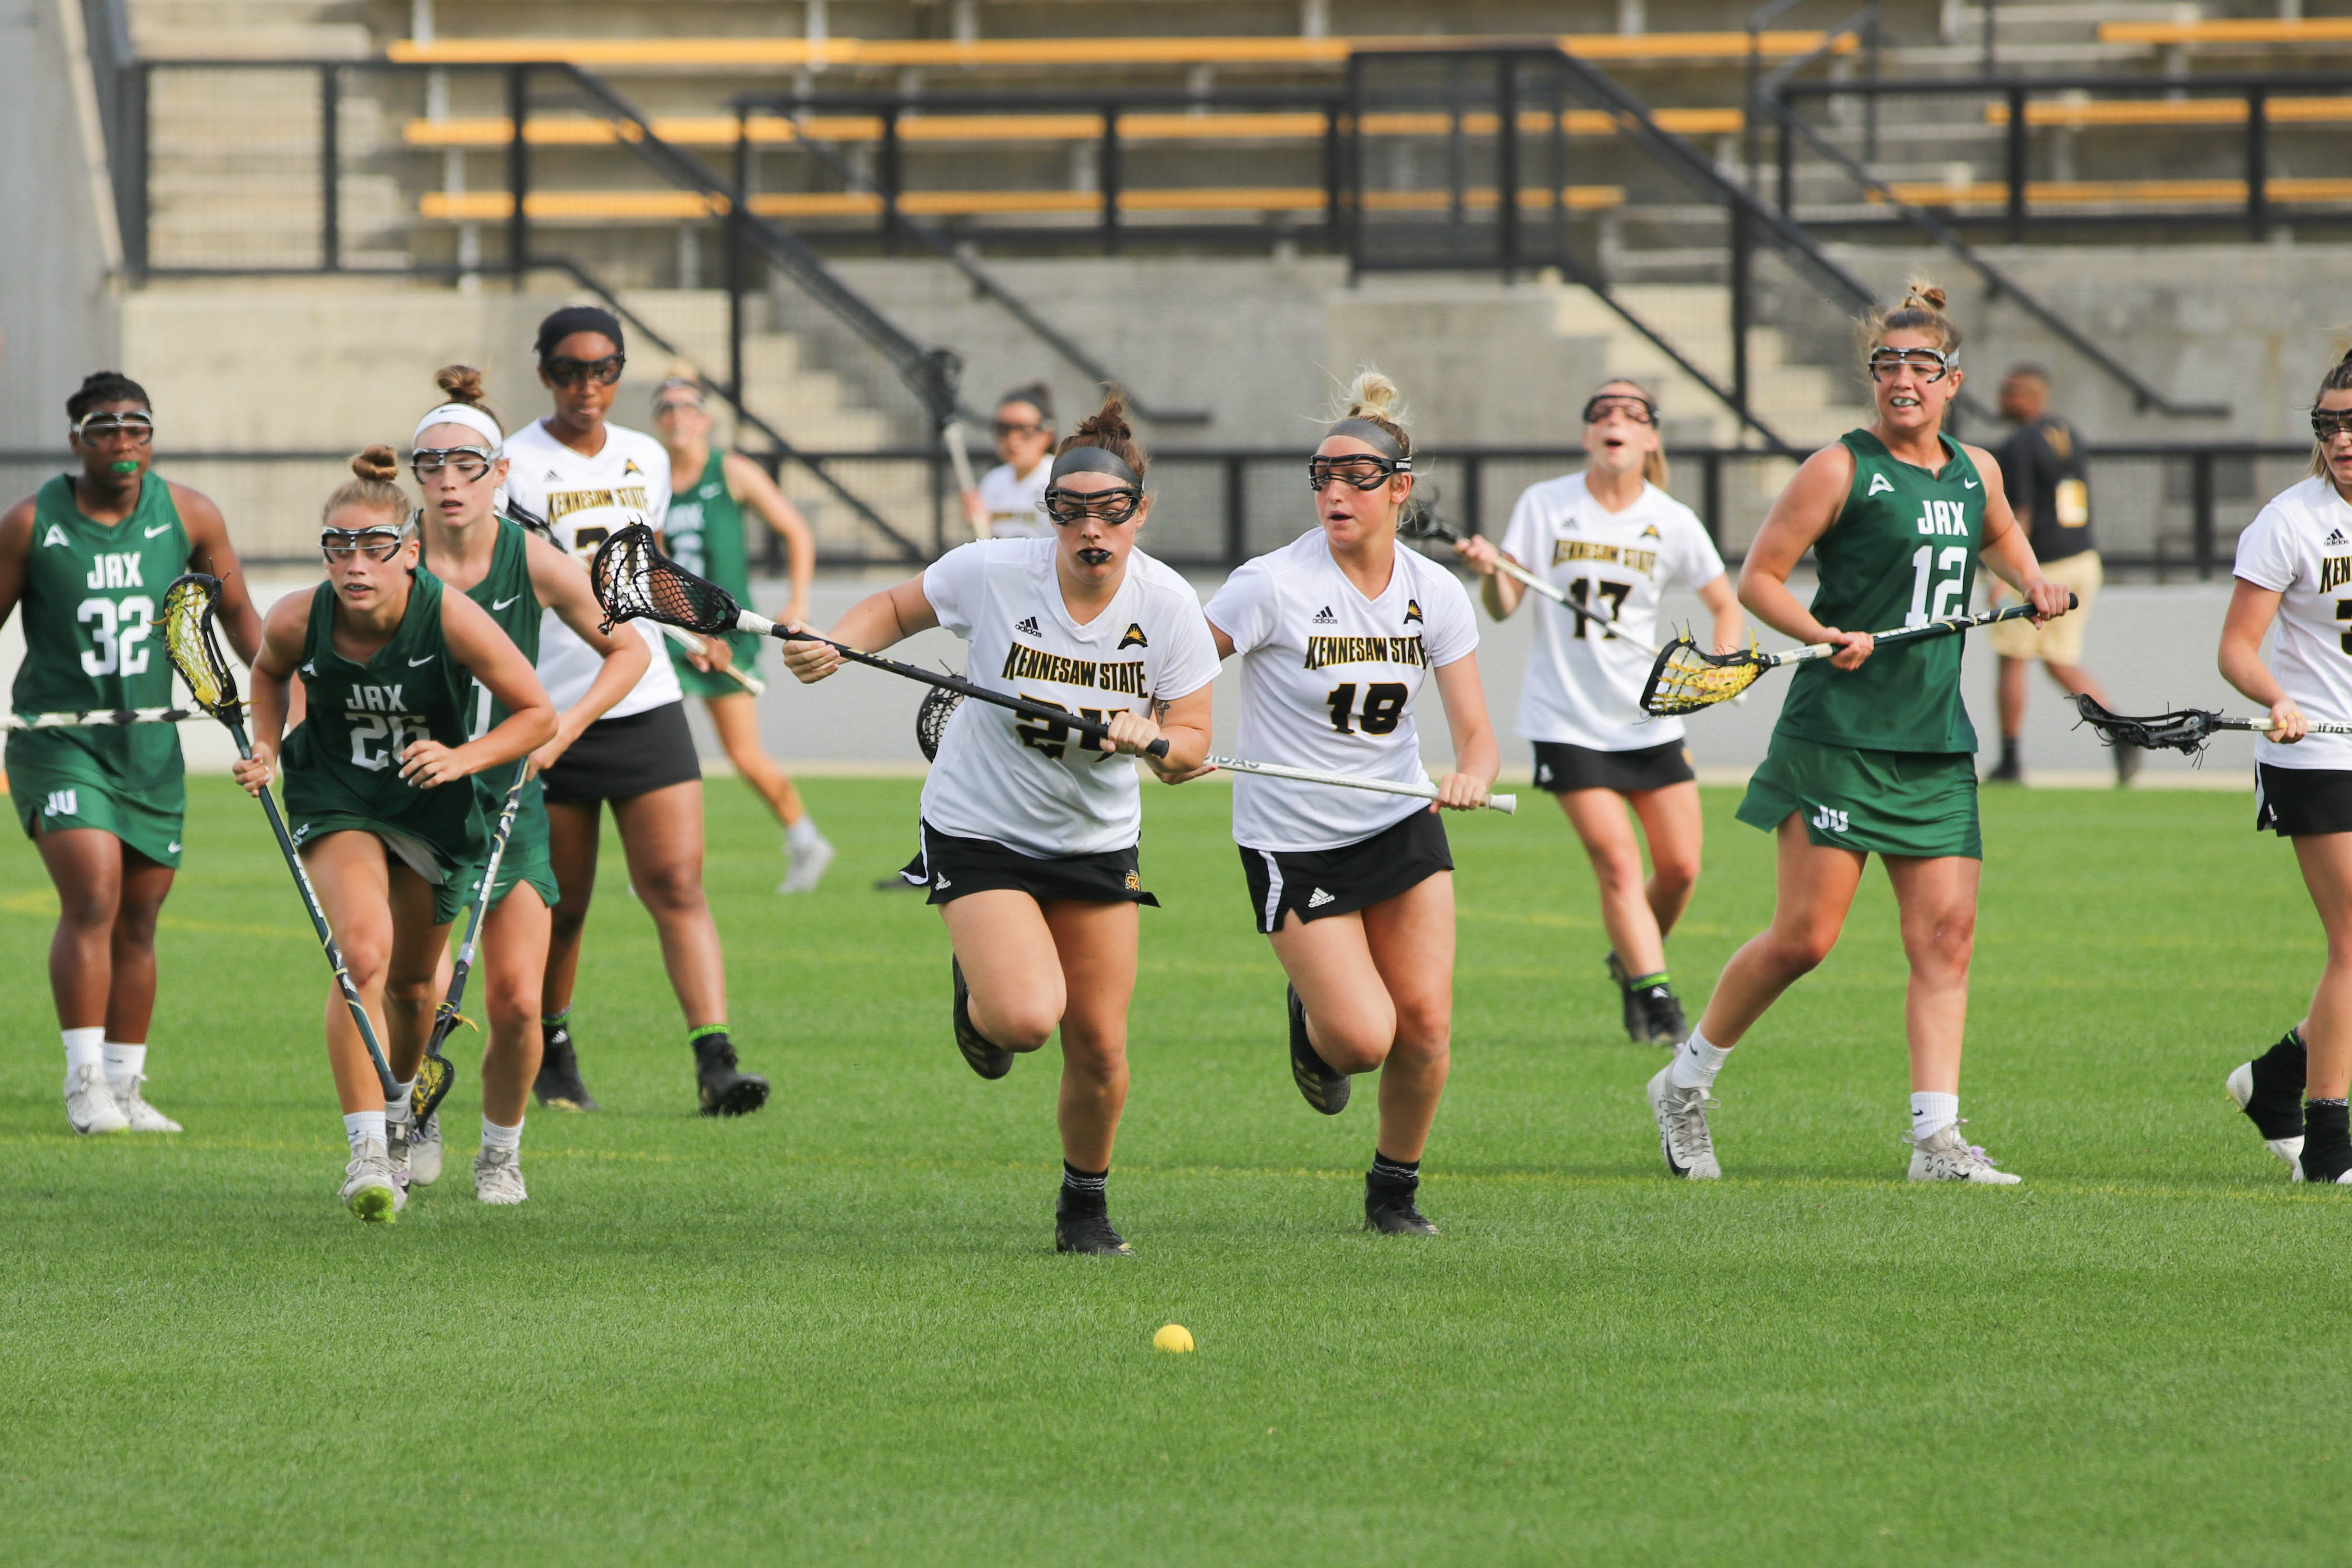 Squires scores five as LAX tops Hatters on Senior Day